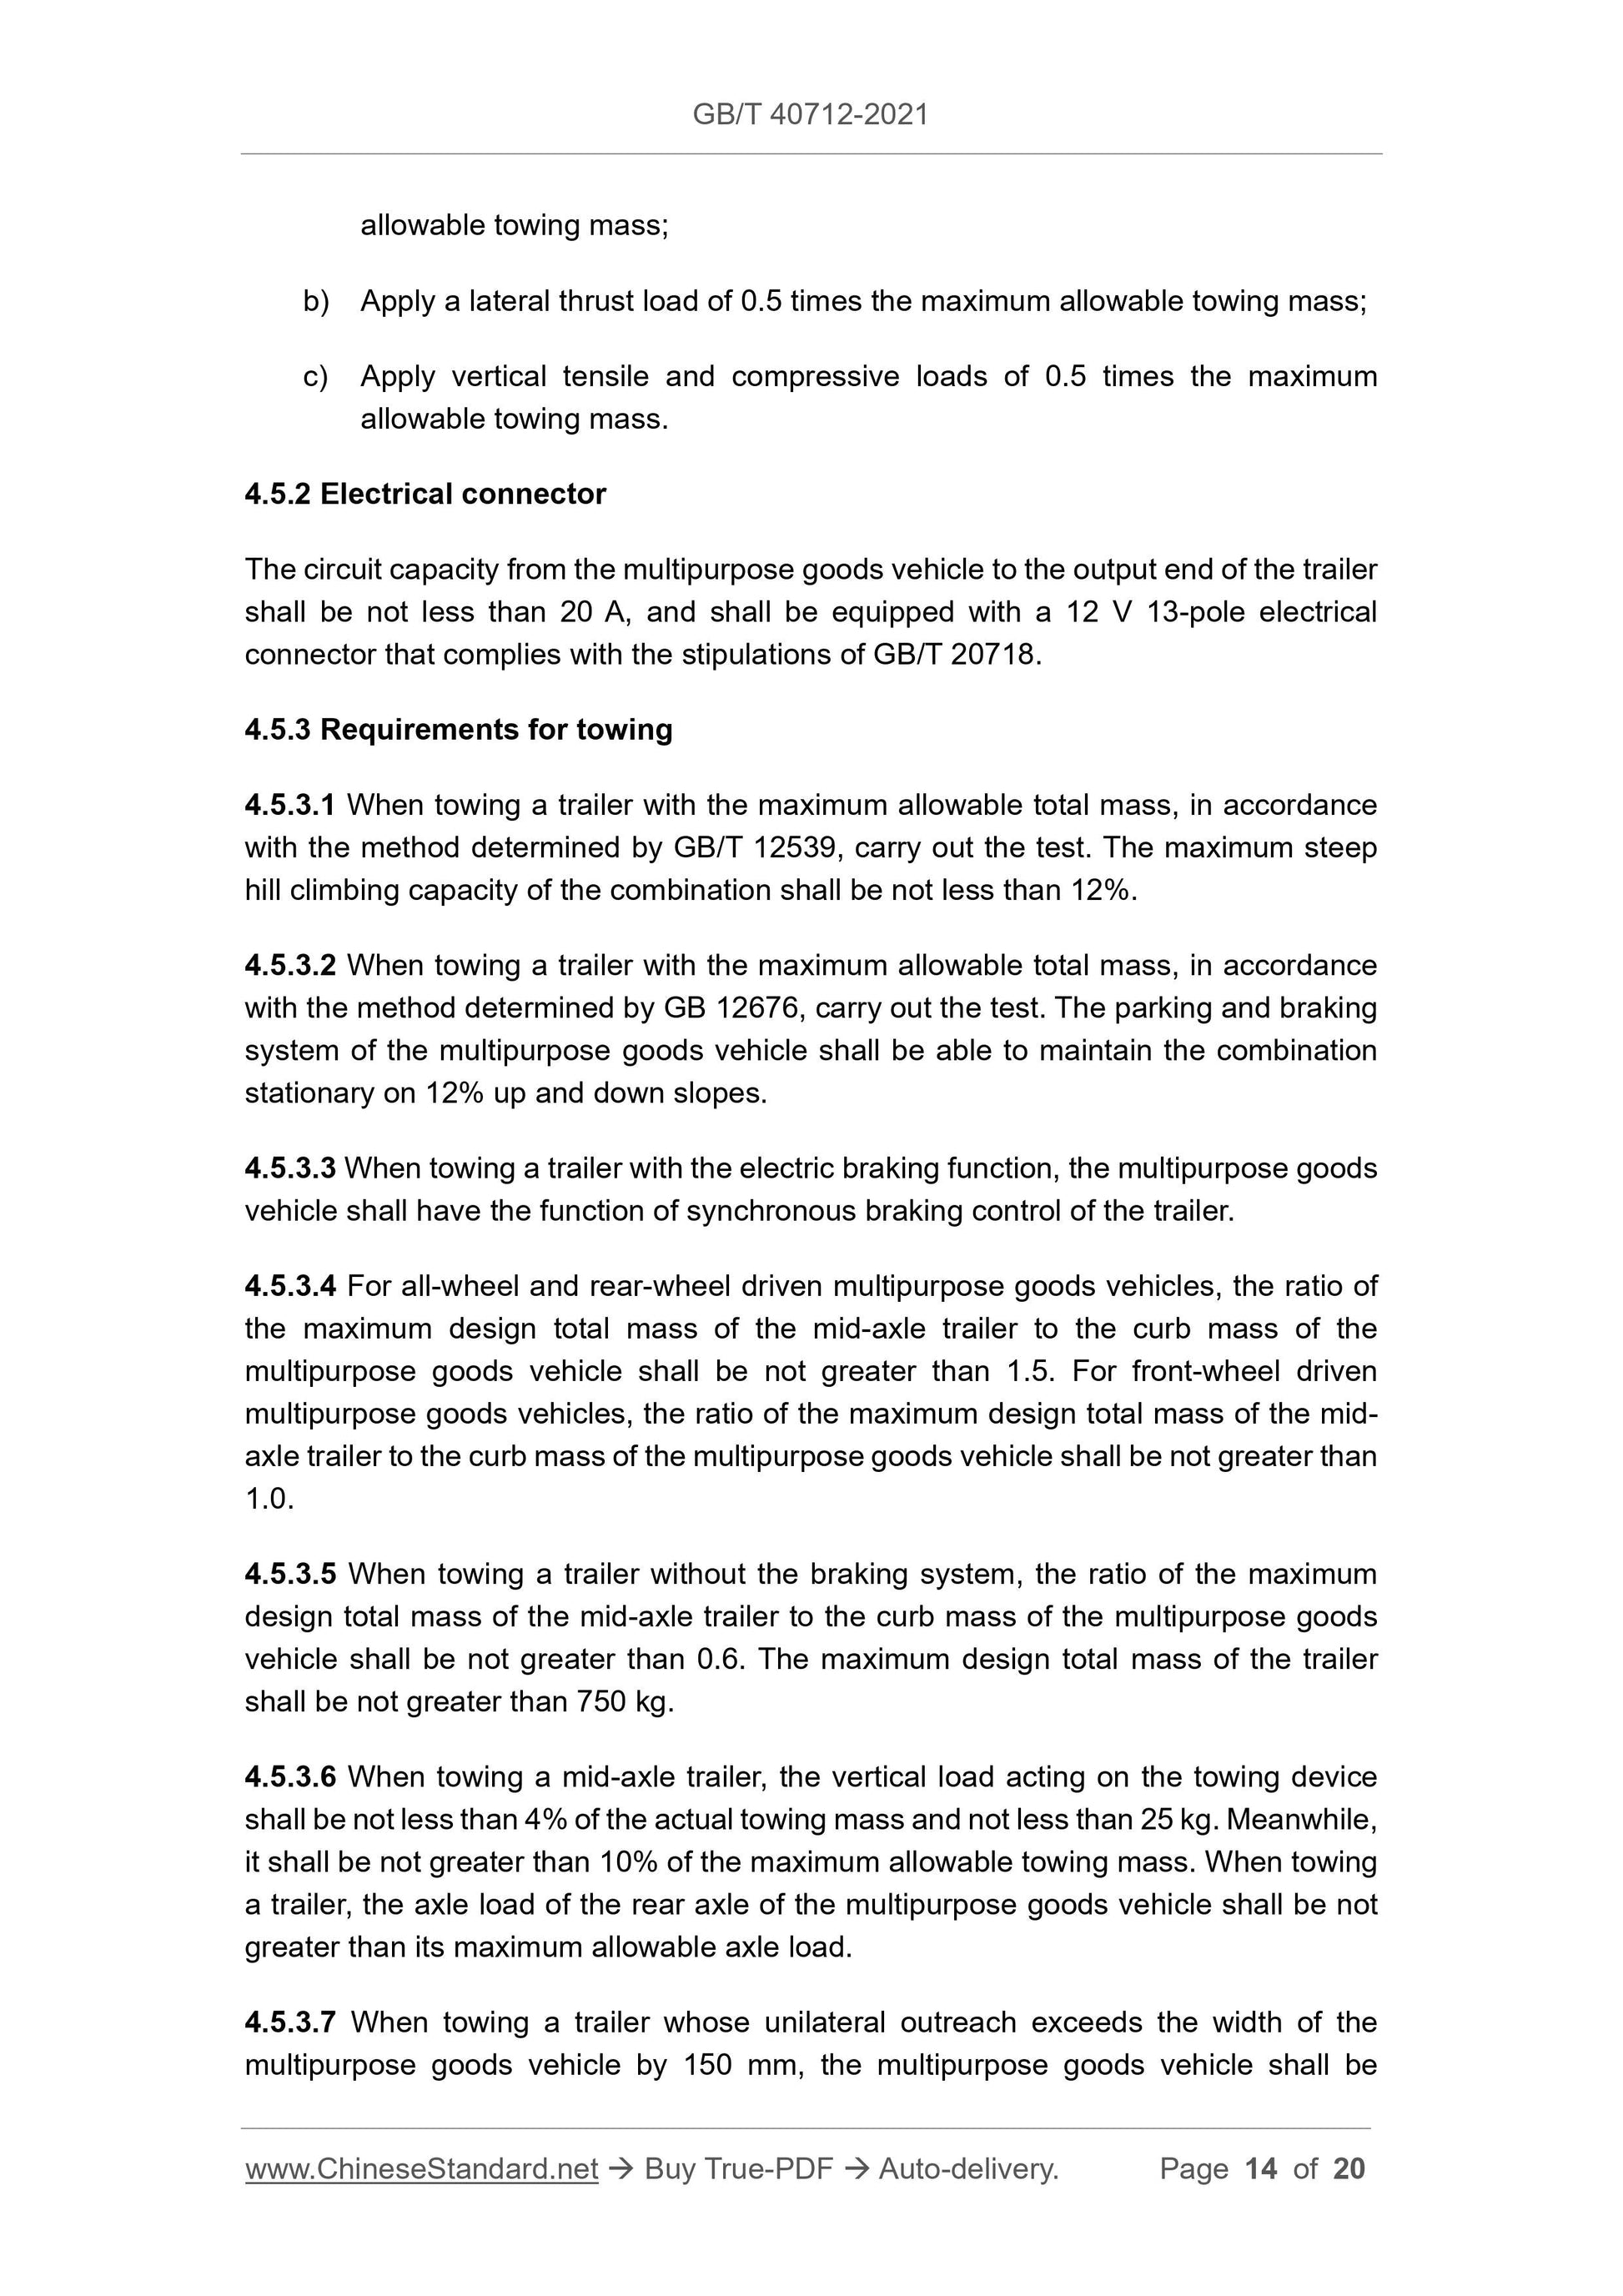 GB/T 40712-2021 Page 6